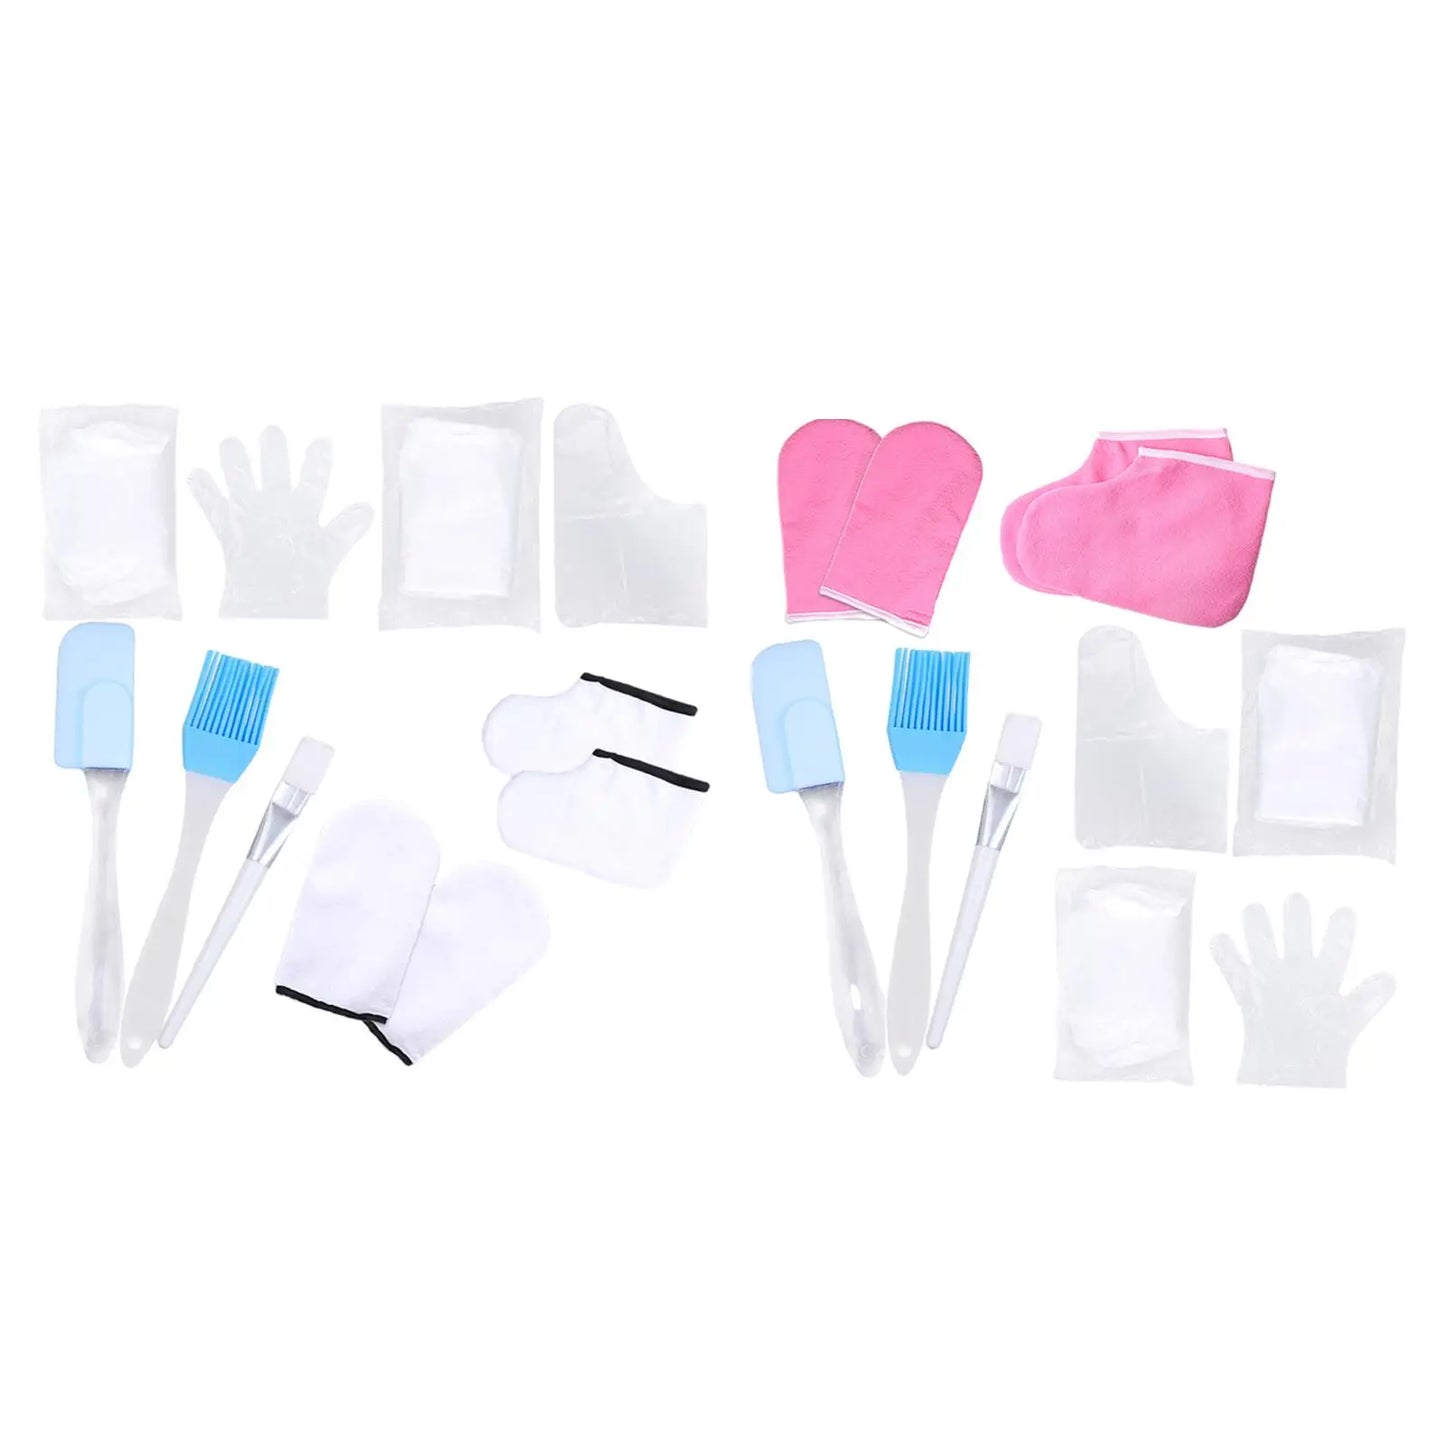 Paraffin Wax Melting Gloves and Booties Wax Heater Protection Kit for Hand Feet Care SPA			               

Wax Hand Foot Gloves for Hand Feet Care SPA Bath Men Women.